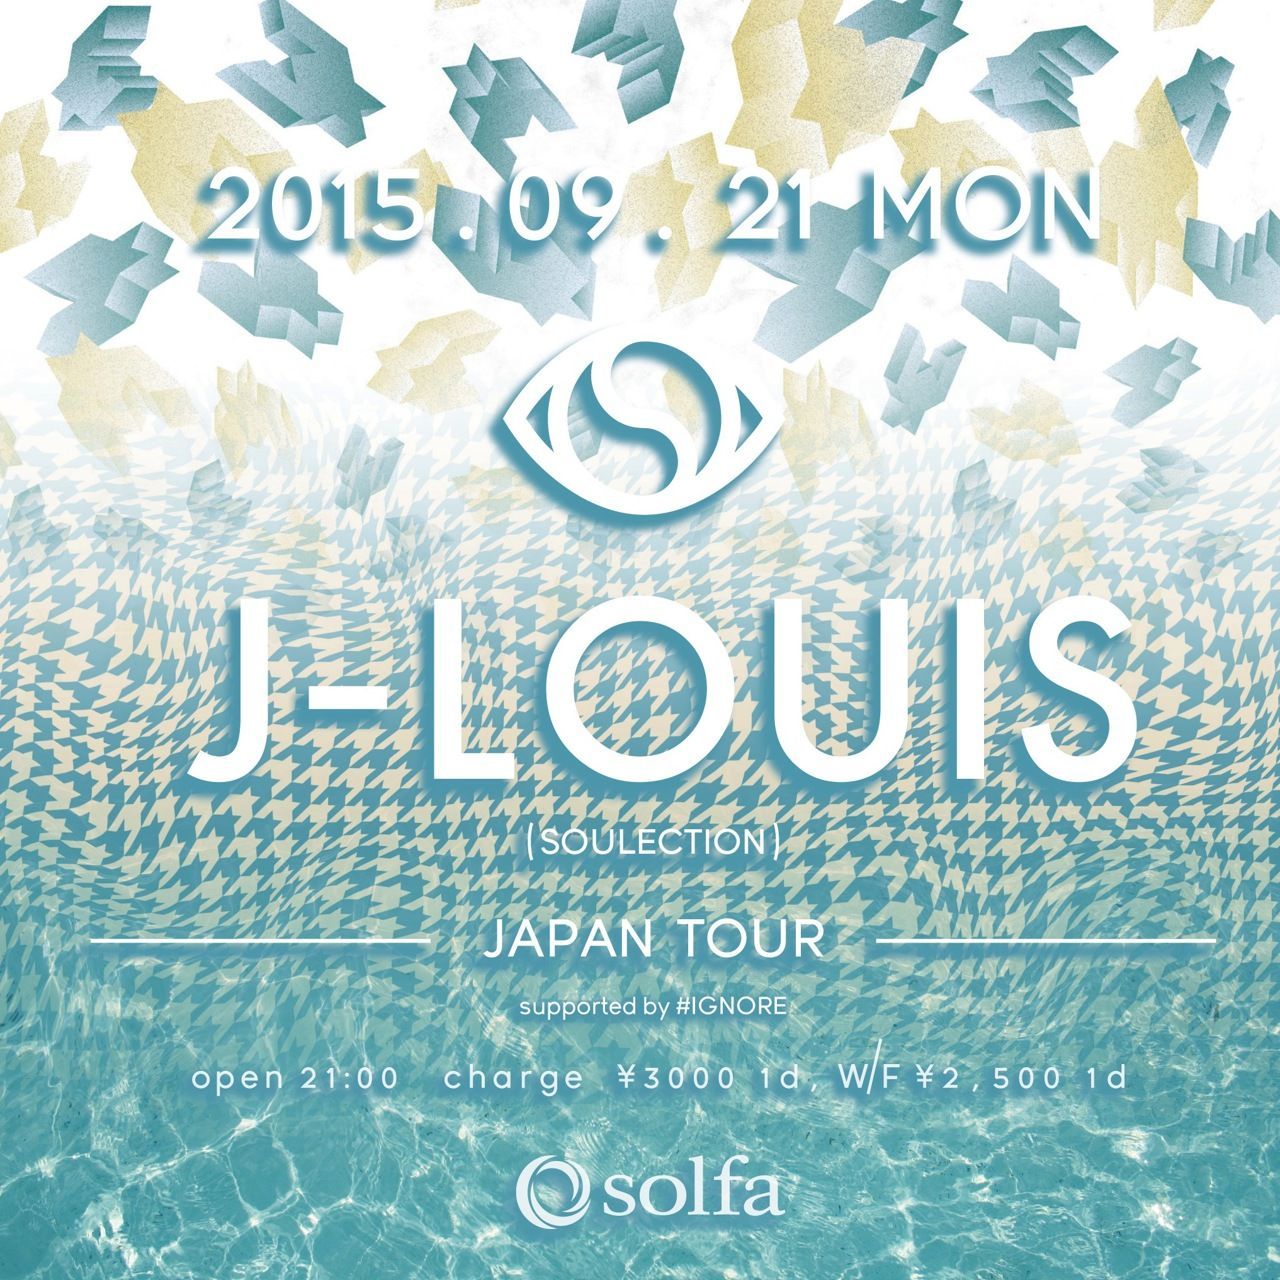 solfa 7th Anniversary Party DAY 4 ''J-Louis Japan tour supported by #IGNORE''